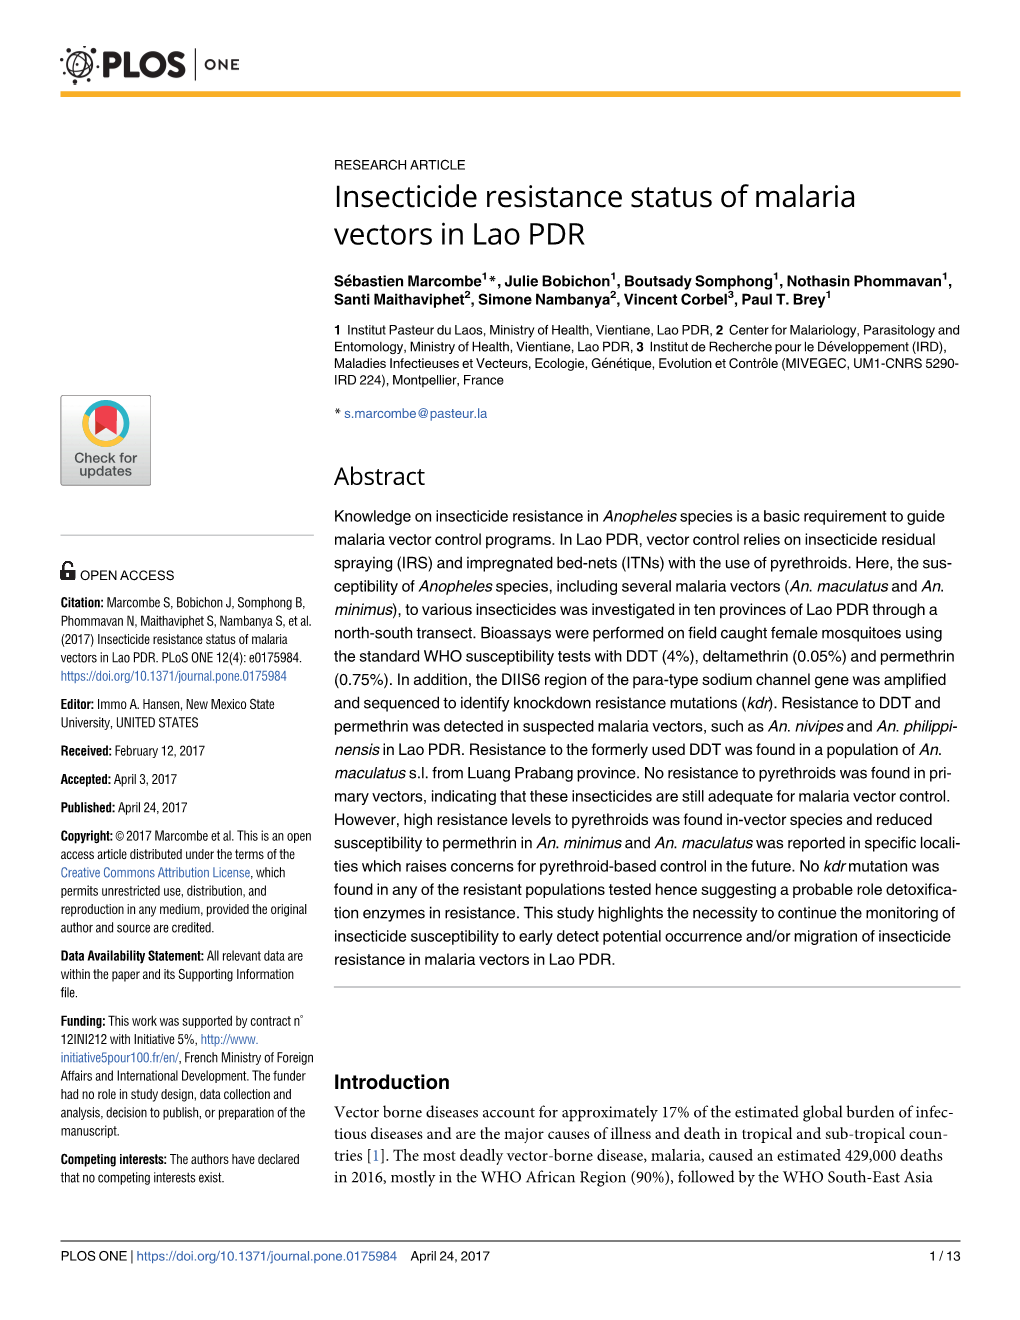 Insecticide Resistance Status of Malaria Vectors in Lao PDR